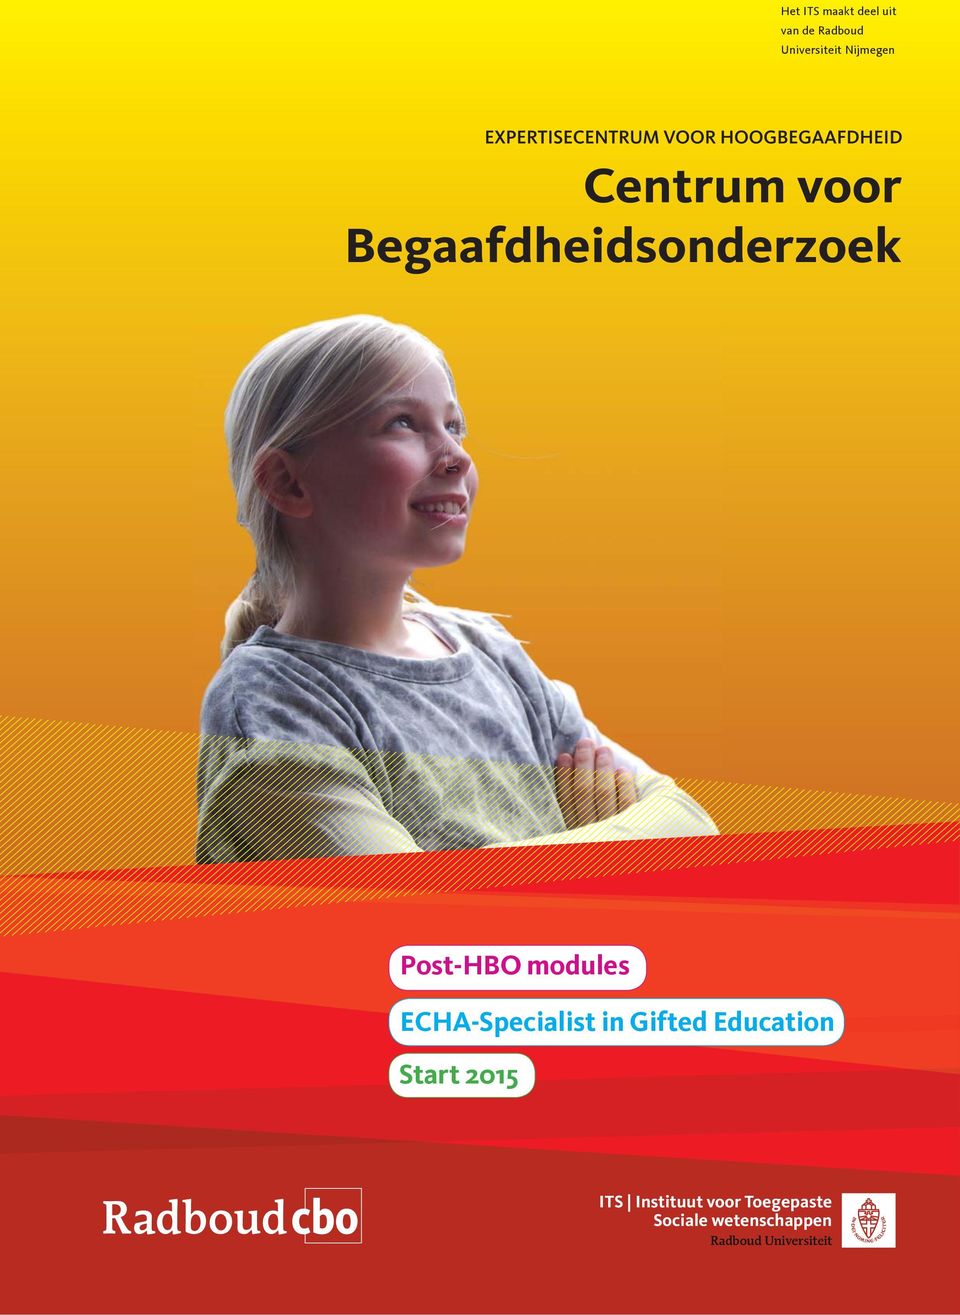 ECHA-Specialist in Gifted Education Start 2015